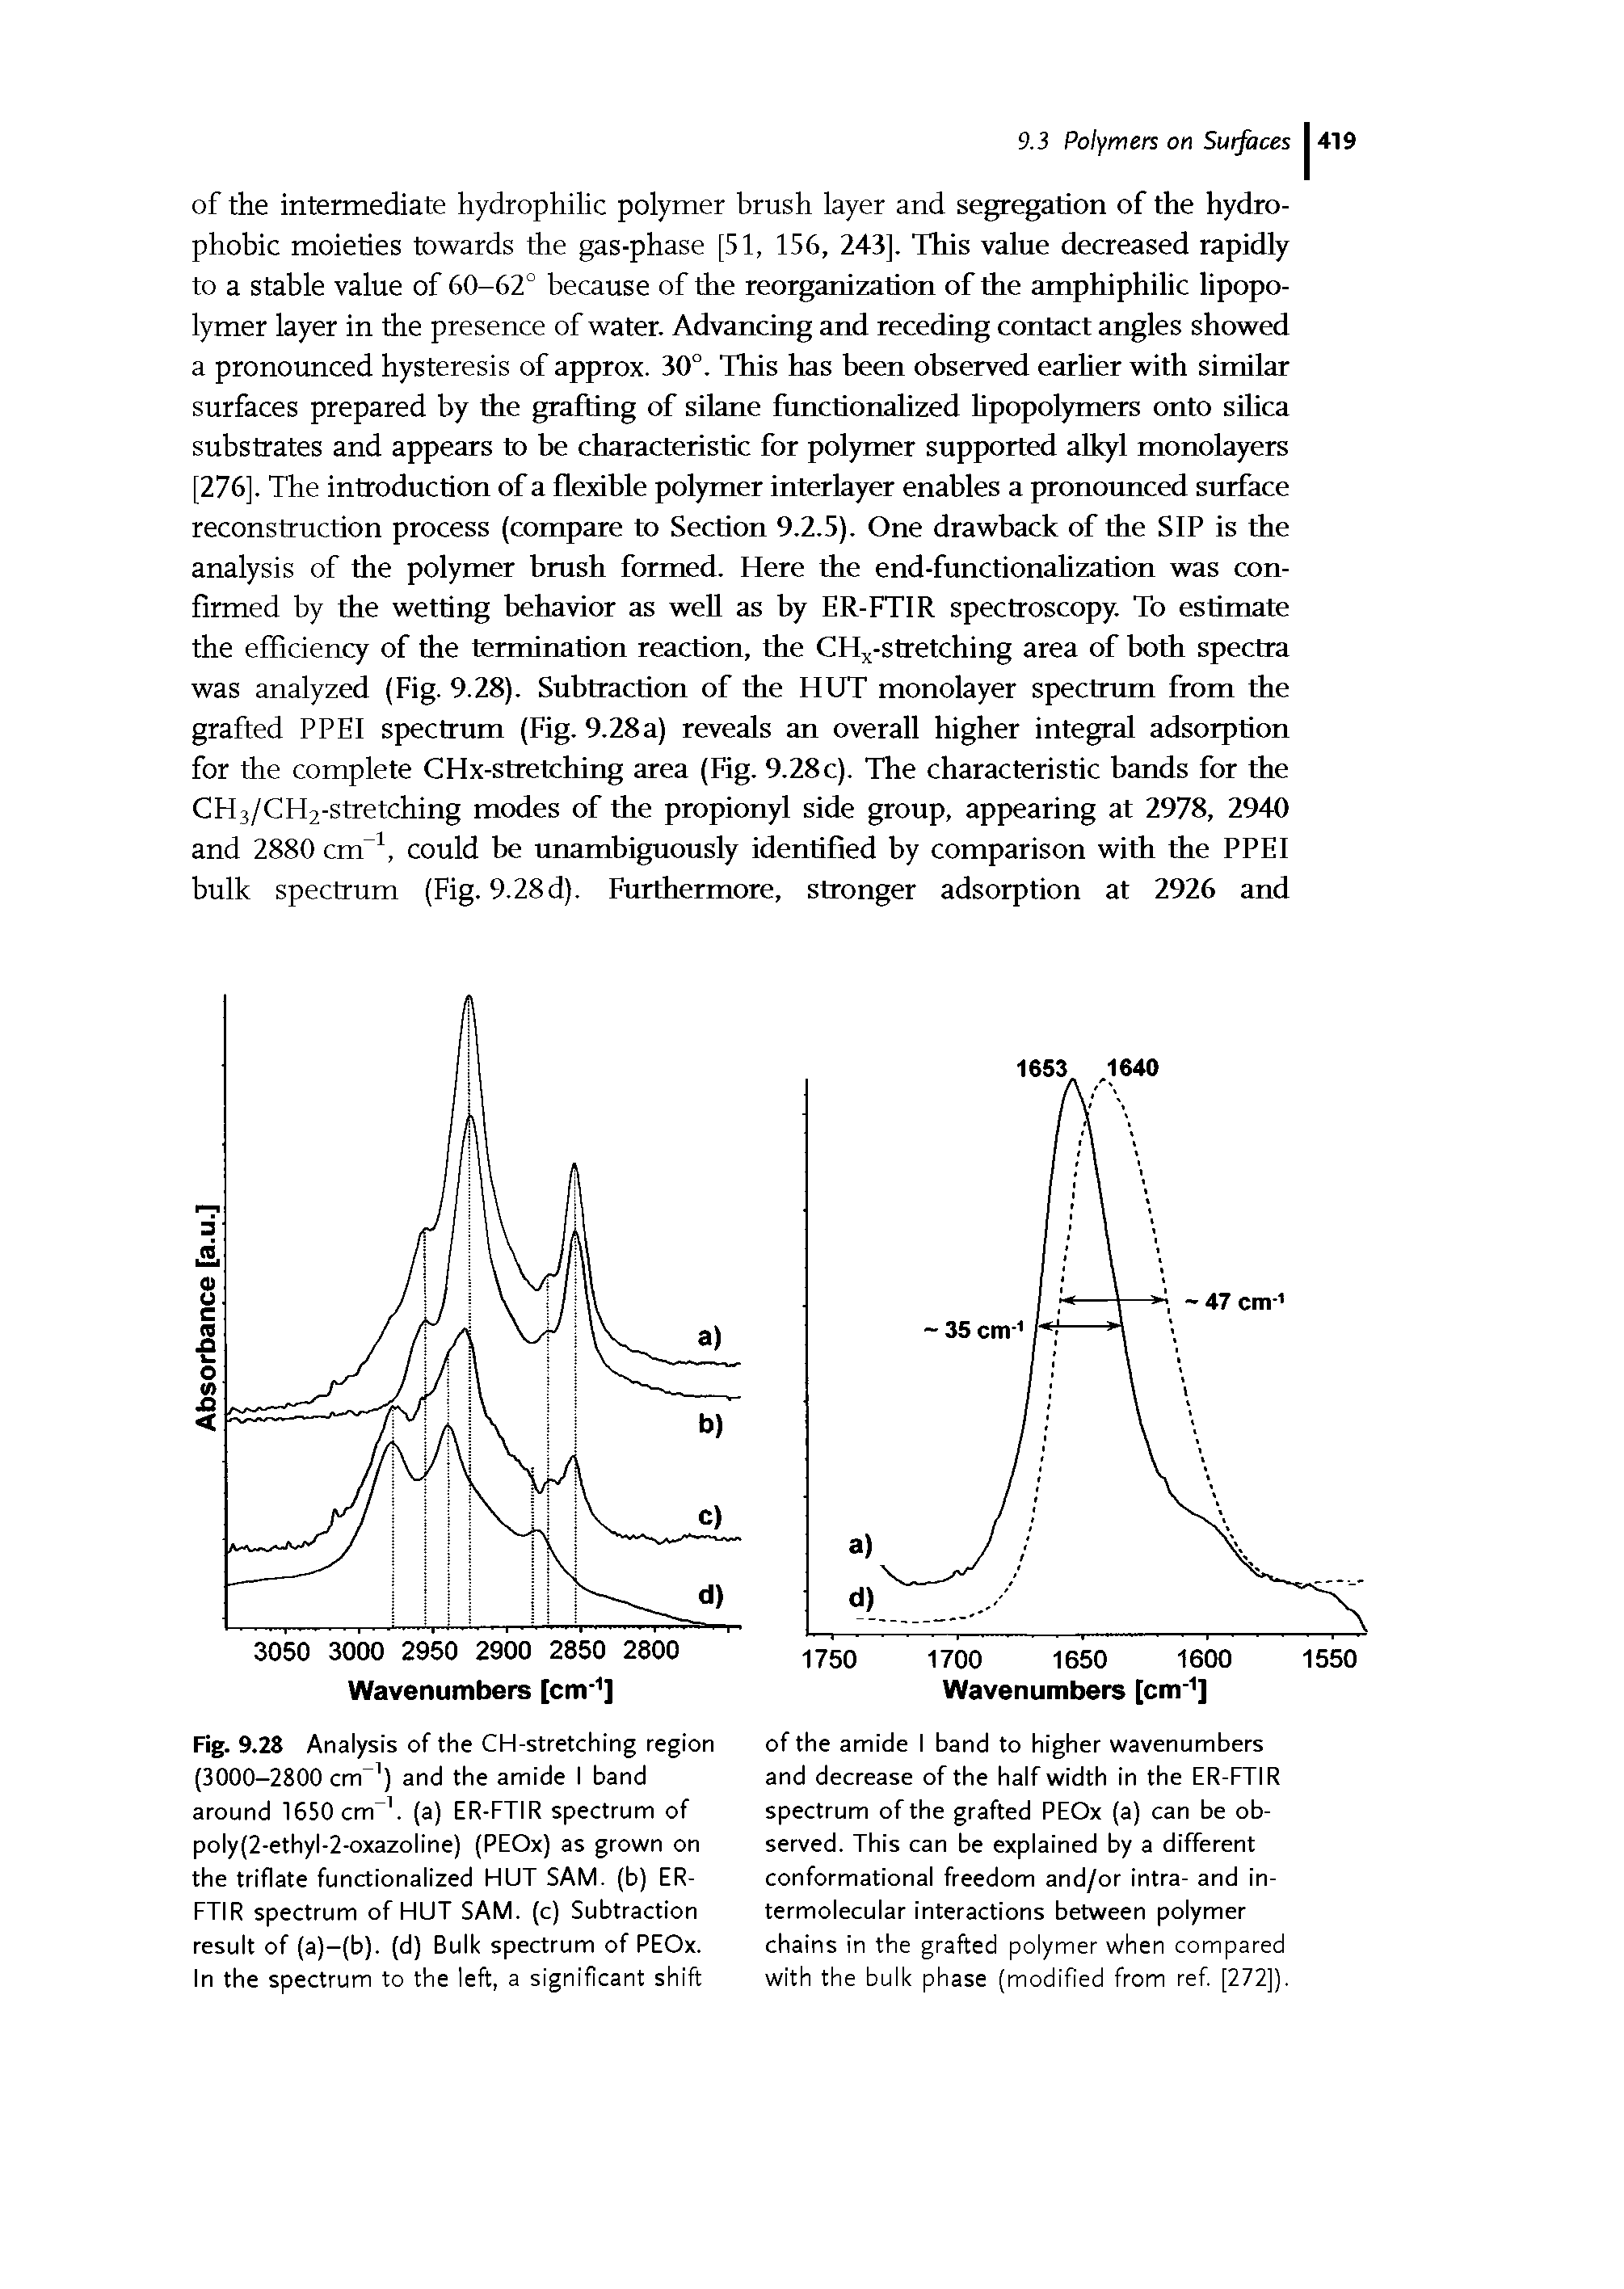 Fig. 9.28 Analysis of the CH-stretching region (3000-2800 cm ) and the amide I band around 1650 cm V (a) ER-FTIR spectrum of poly(2-ethyl-2-oxazoline) (PEOx) as grown on the triflate functionalized HUT SAM. (b) ER-FTIR spectrum of HUT SAM. (c) Subtraction result of (a)-(b). (d) Bulk spectrum of PEOx. In the spectrum to the left, a significant shift...